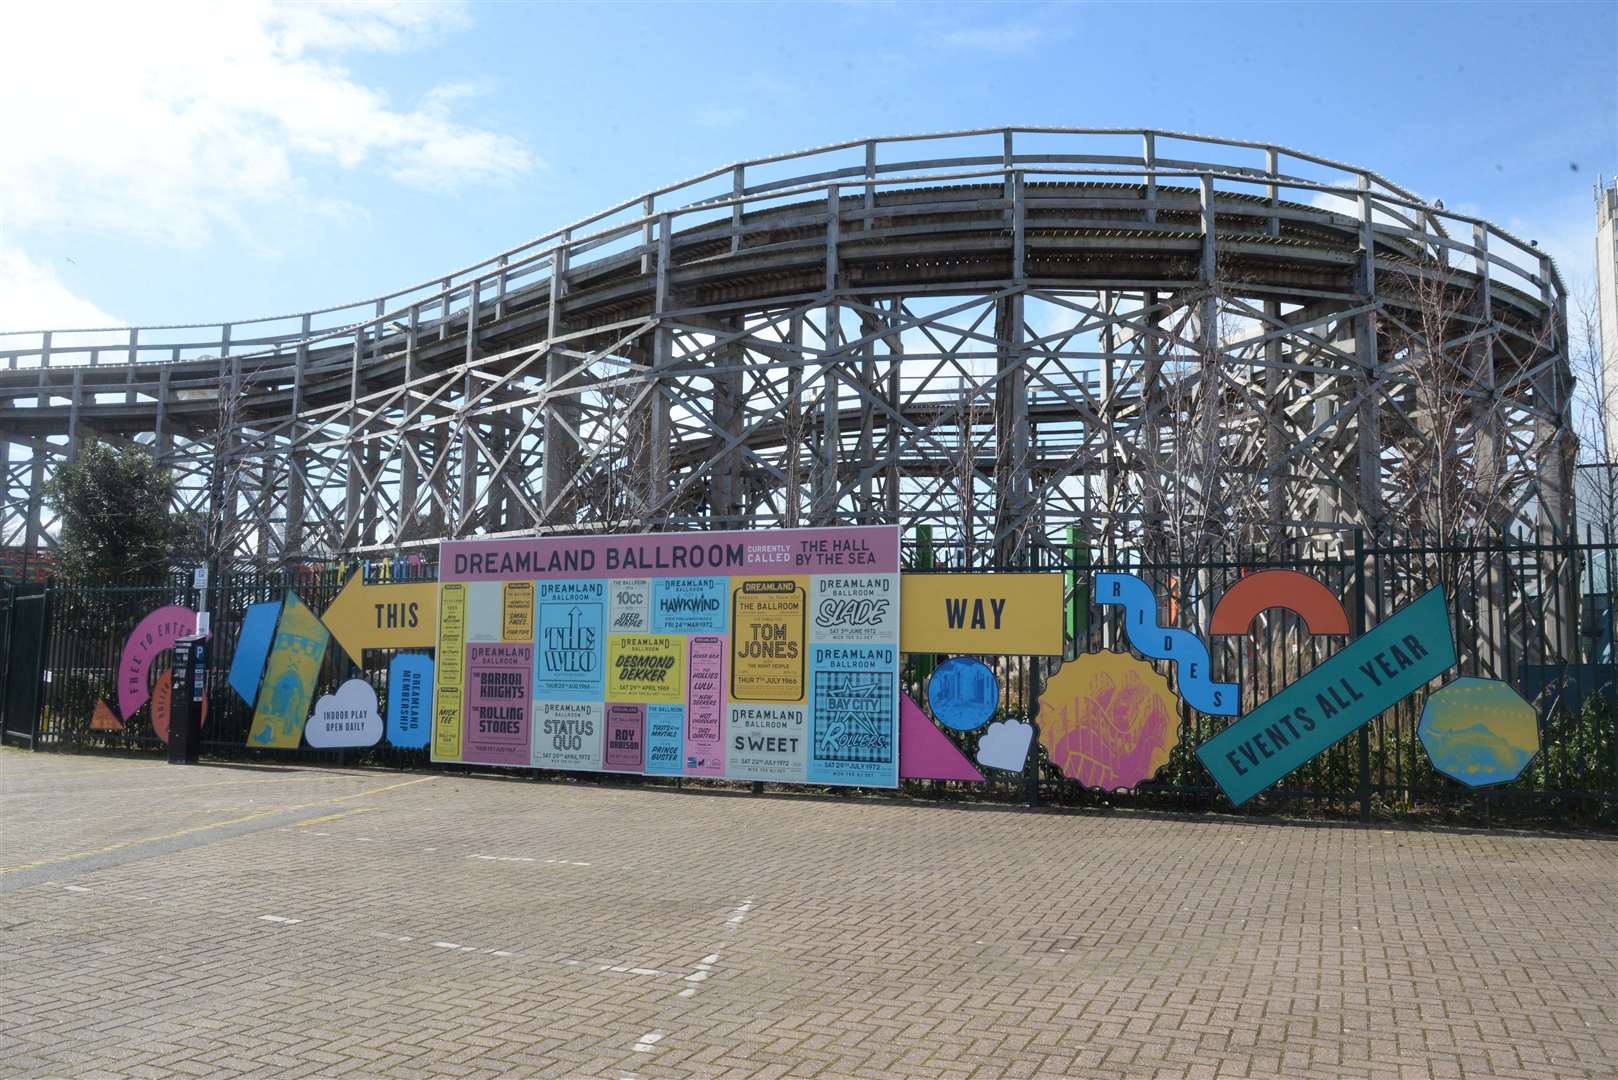 Dreamland is currently closed due to Covid-19. Picture: Chris Davey